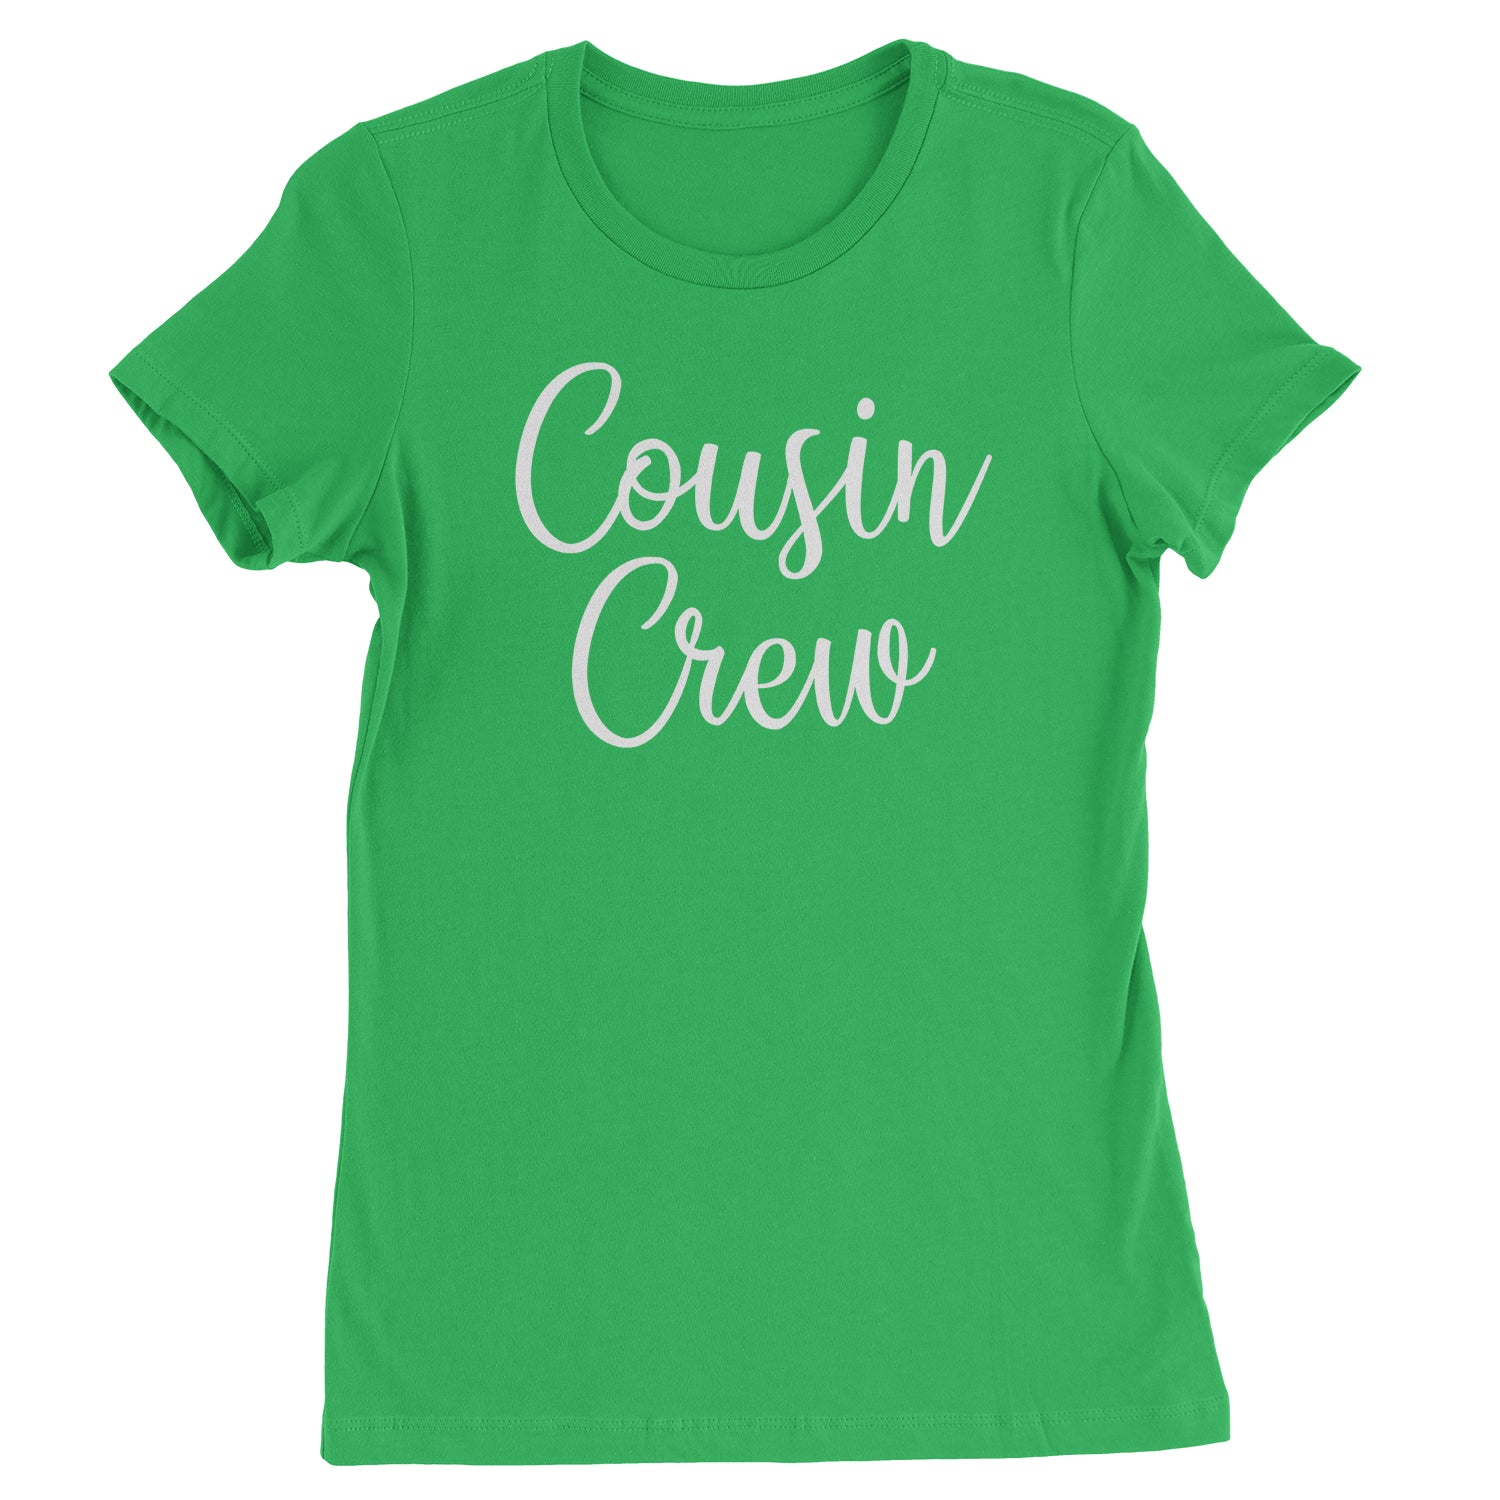 Cousin Crew Fun Family Outfit Womens T-shirt barbecue, bbq, cook, family, out, reunion by Expression Tees